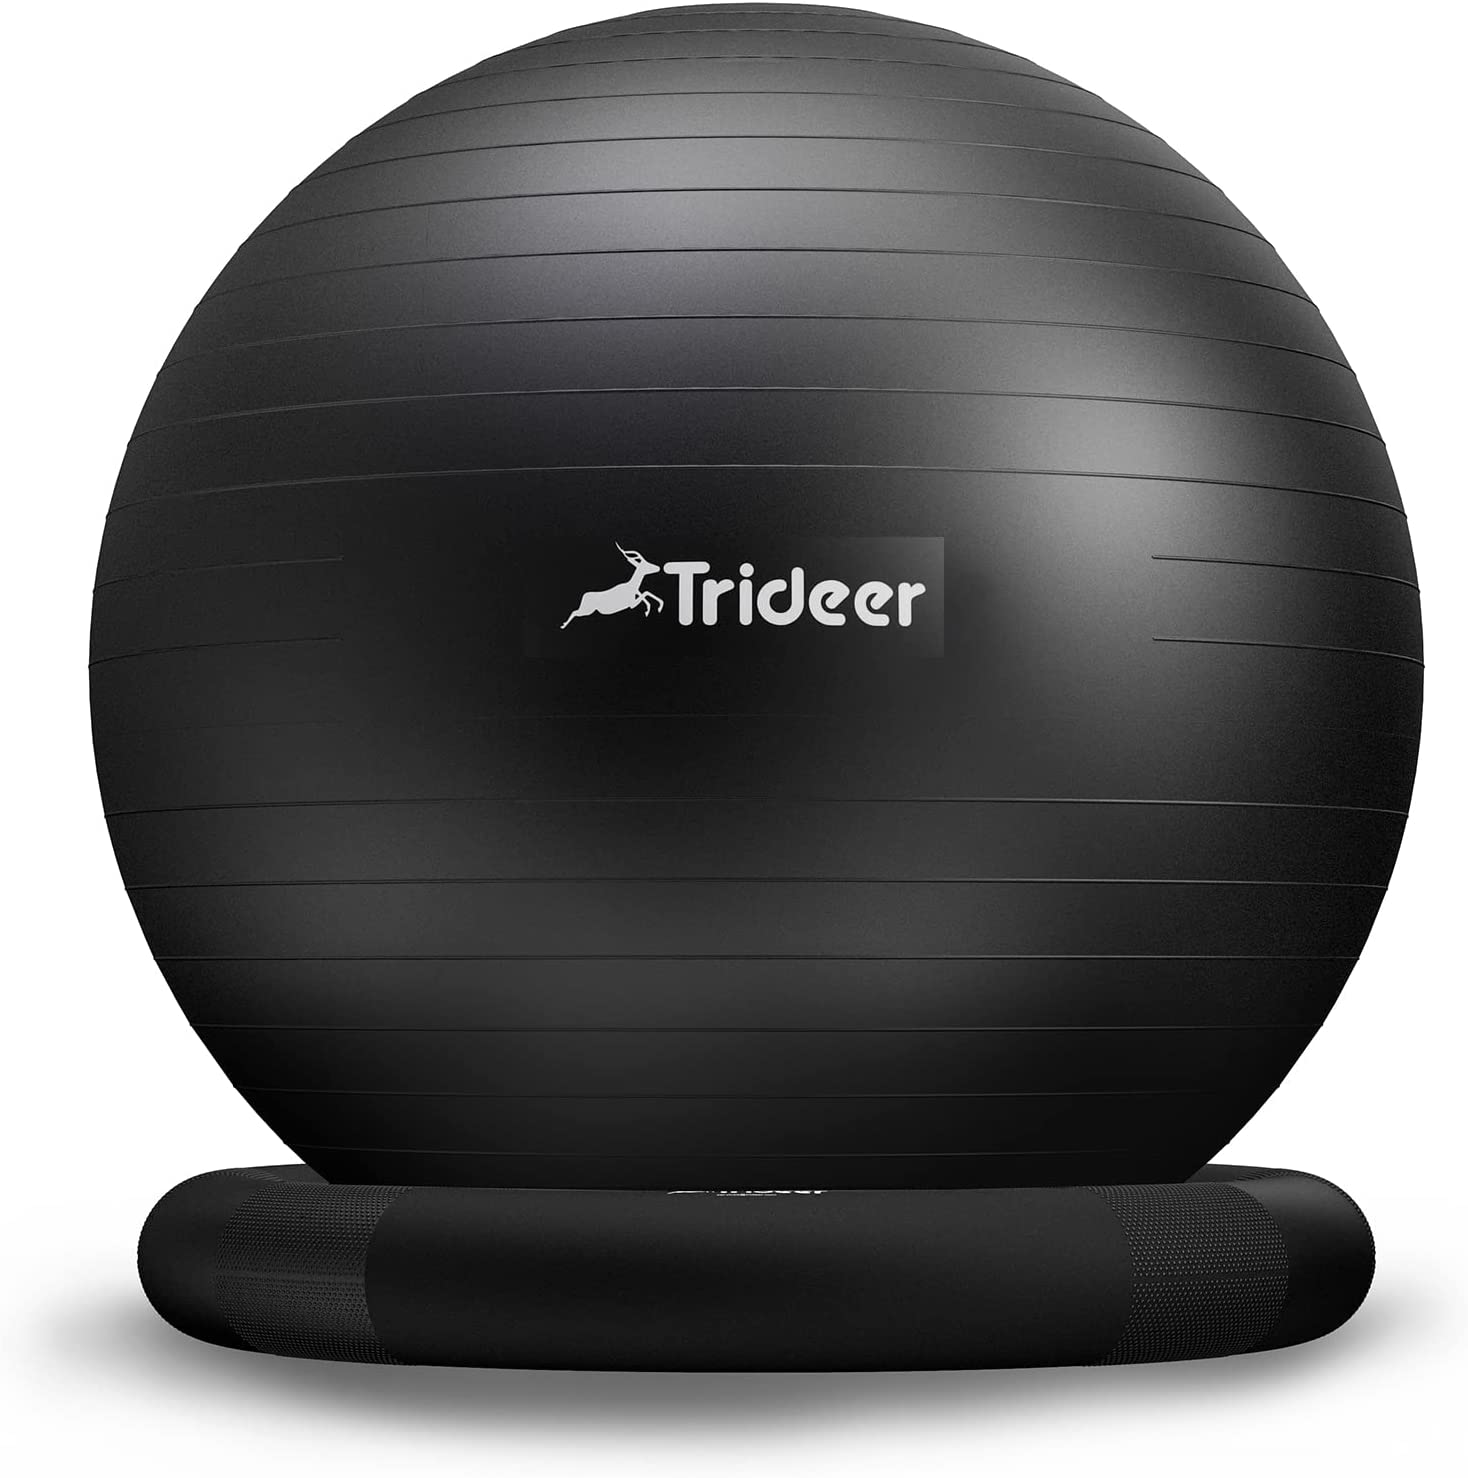 Trideer Hypoallergenic Ball Desk Office & Physical Therapy Chair